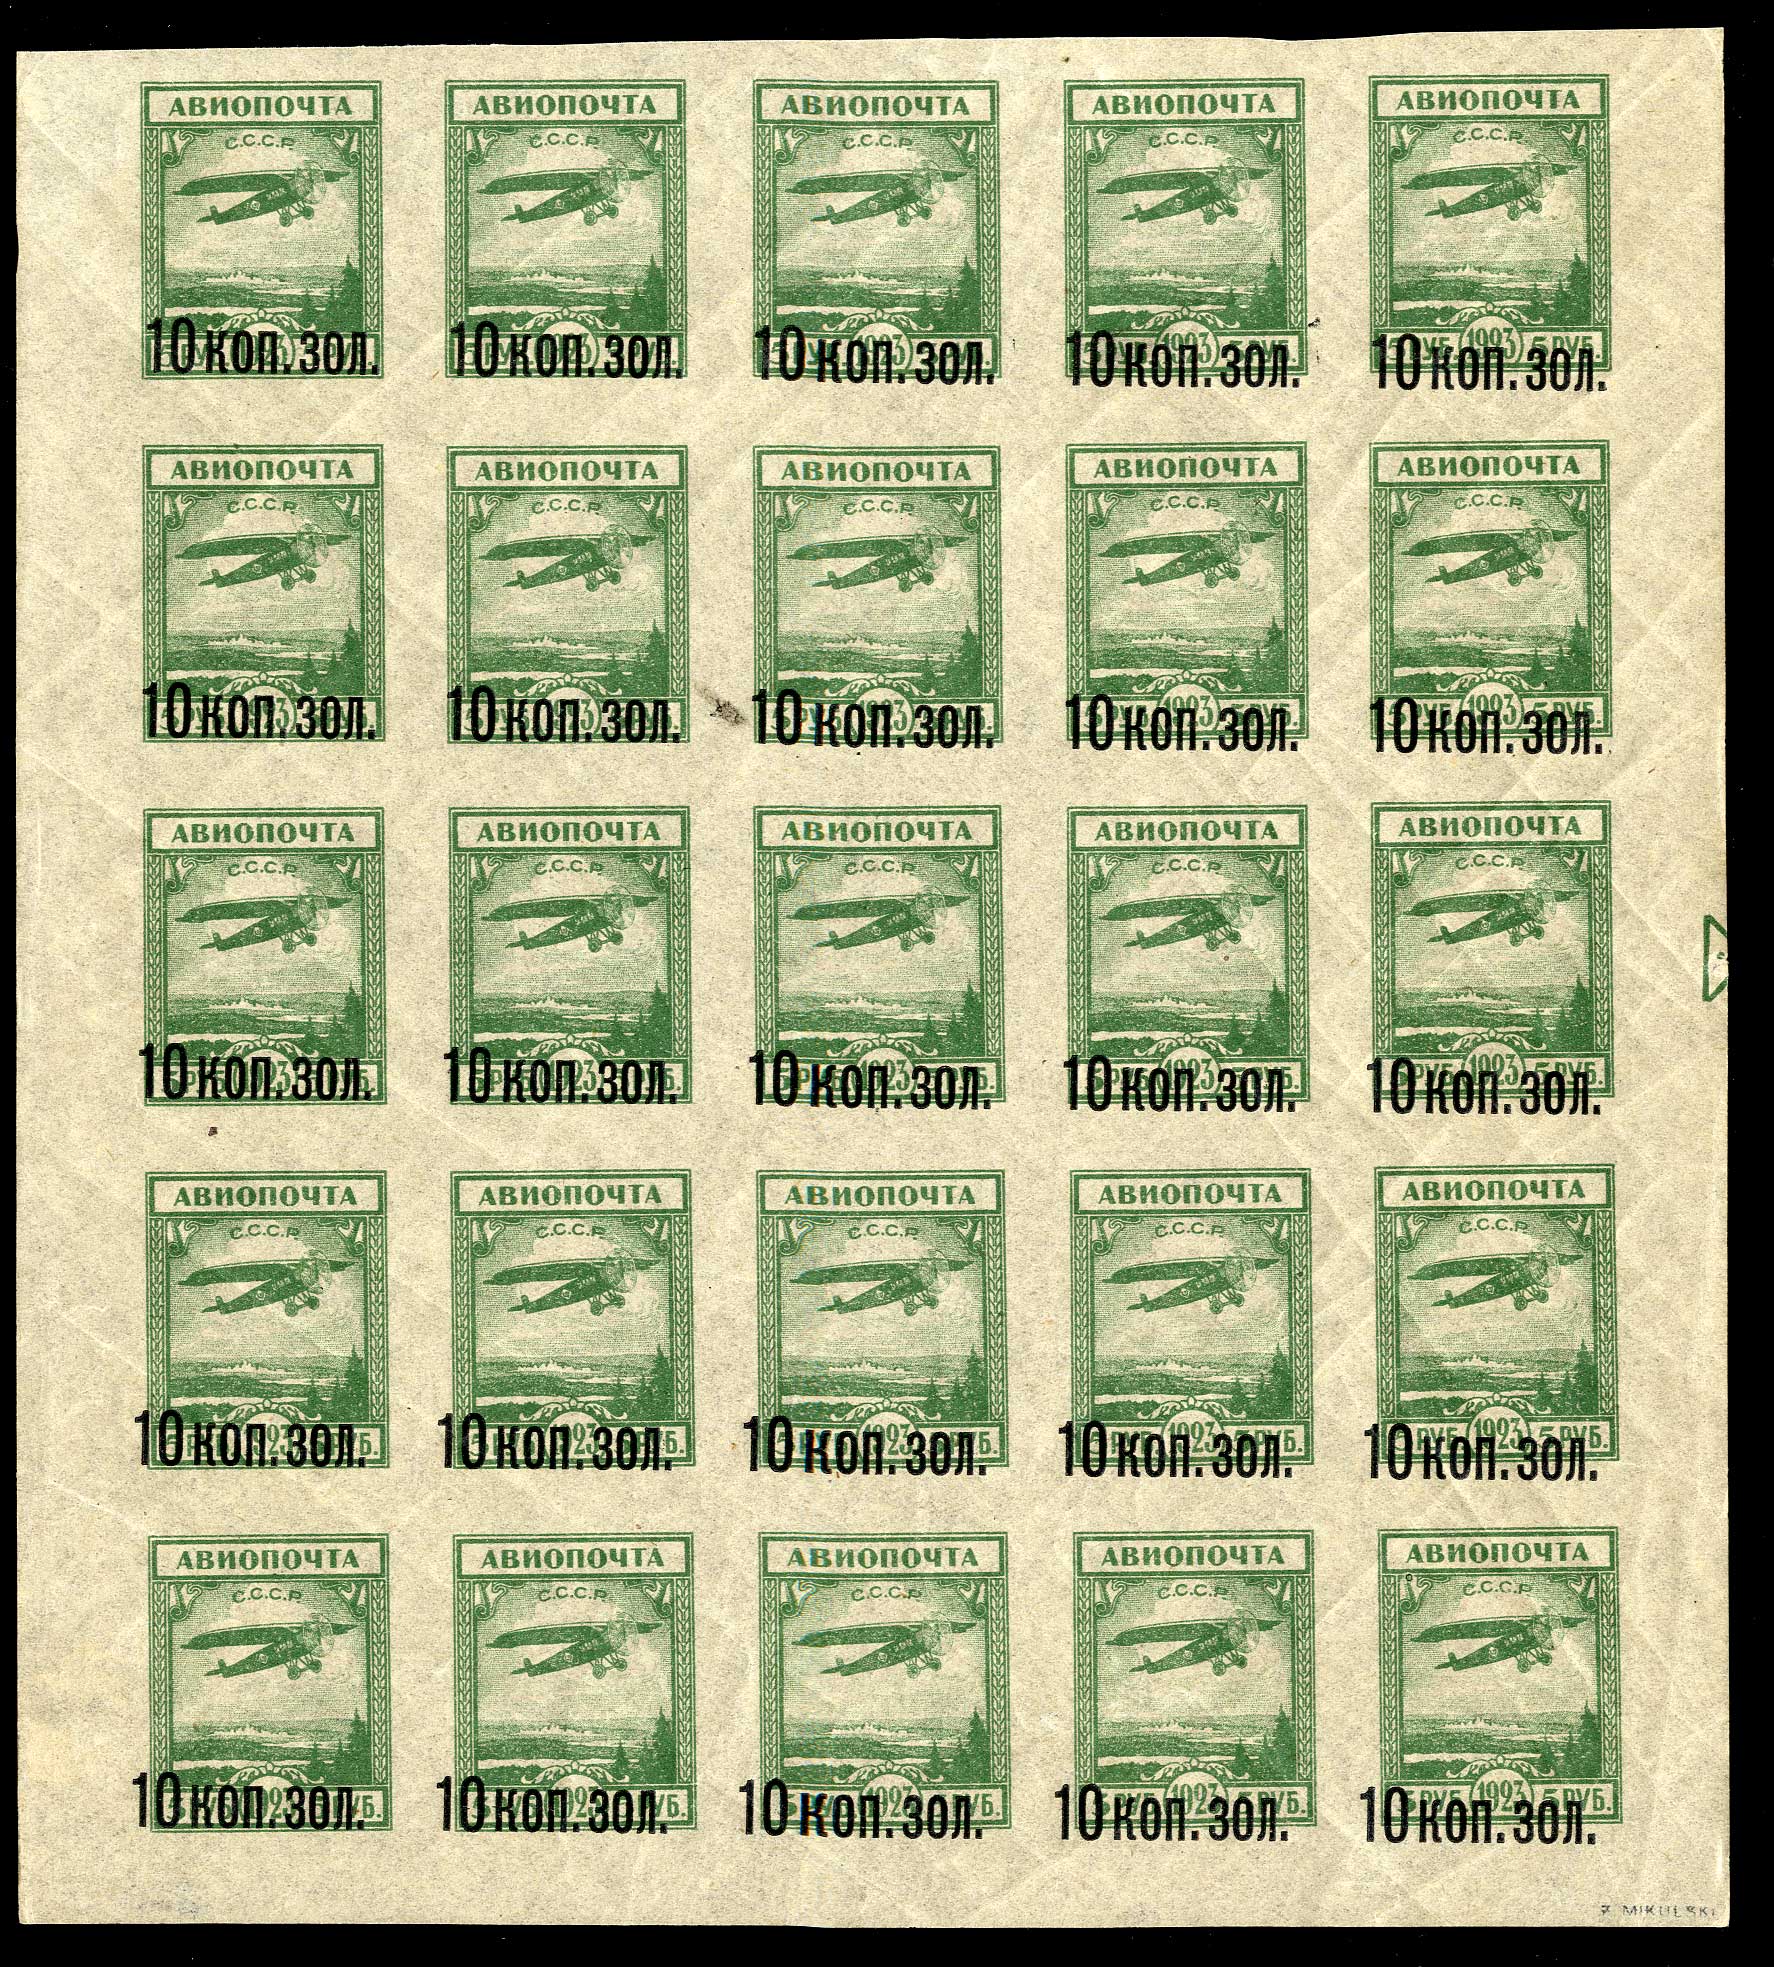 US Stamps - a philatelic history of famous and rare stamps